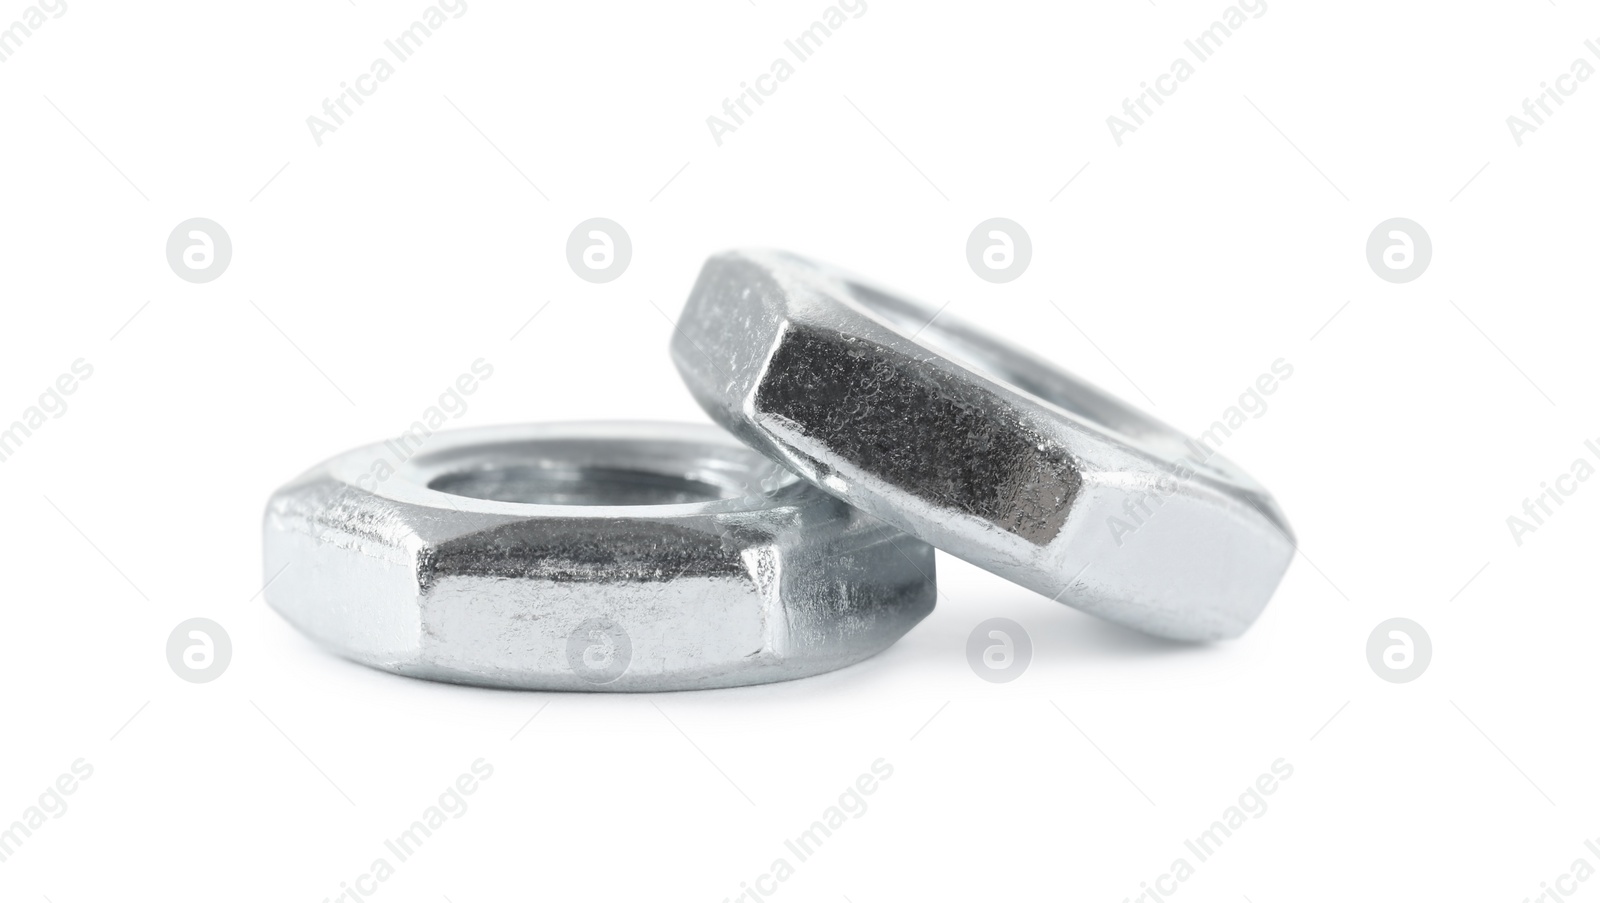 Photo of Two metal jam nuts on white background